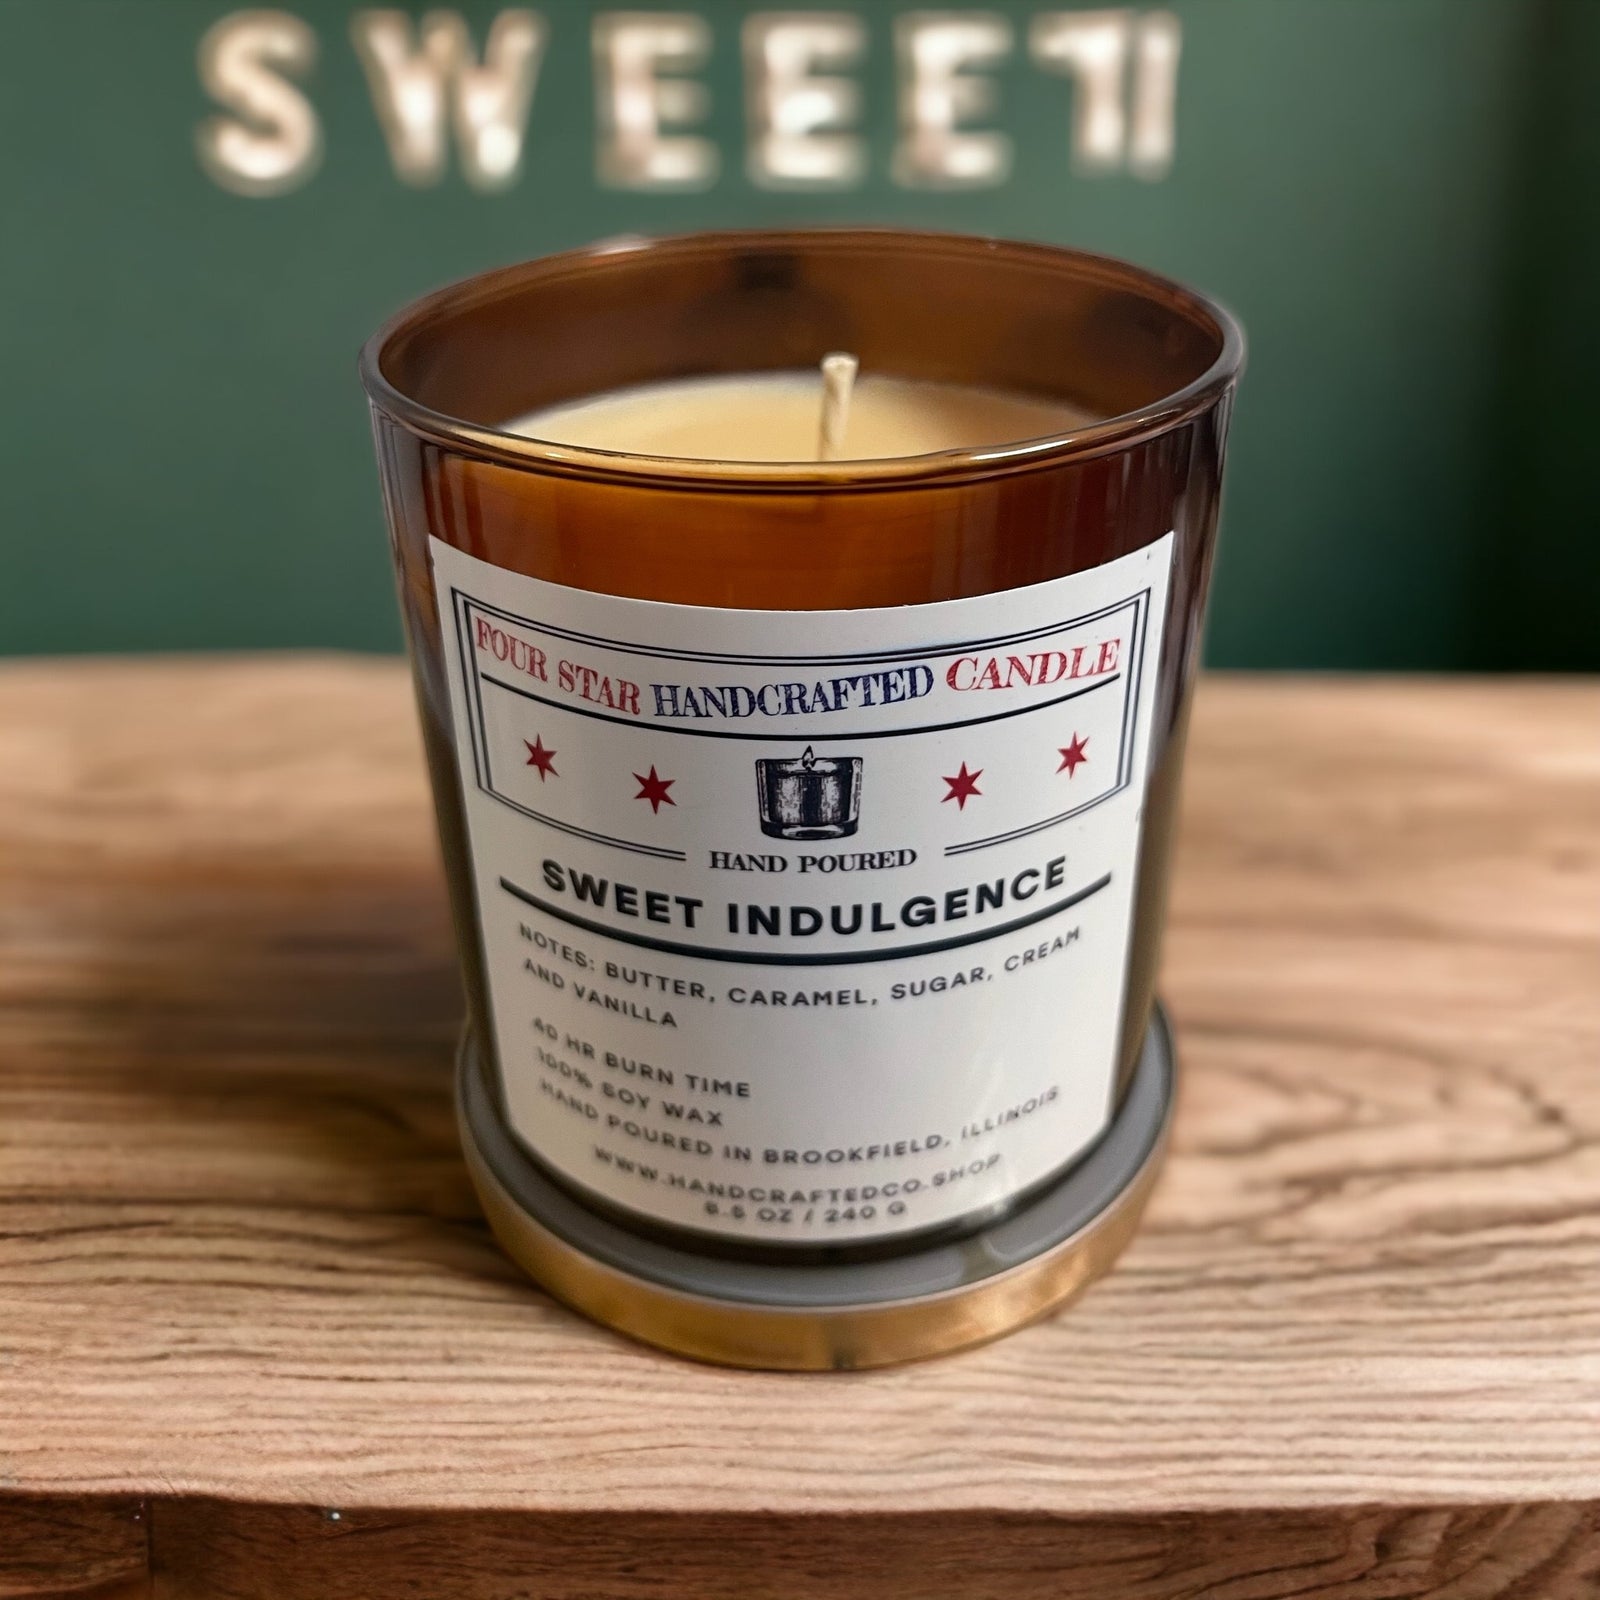 Sweet Indulgence Soy Wax Candle - Four Star Handcrafted Company